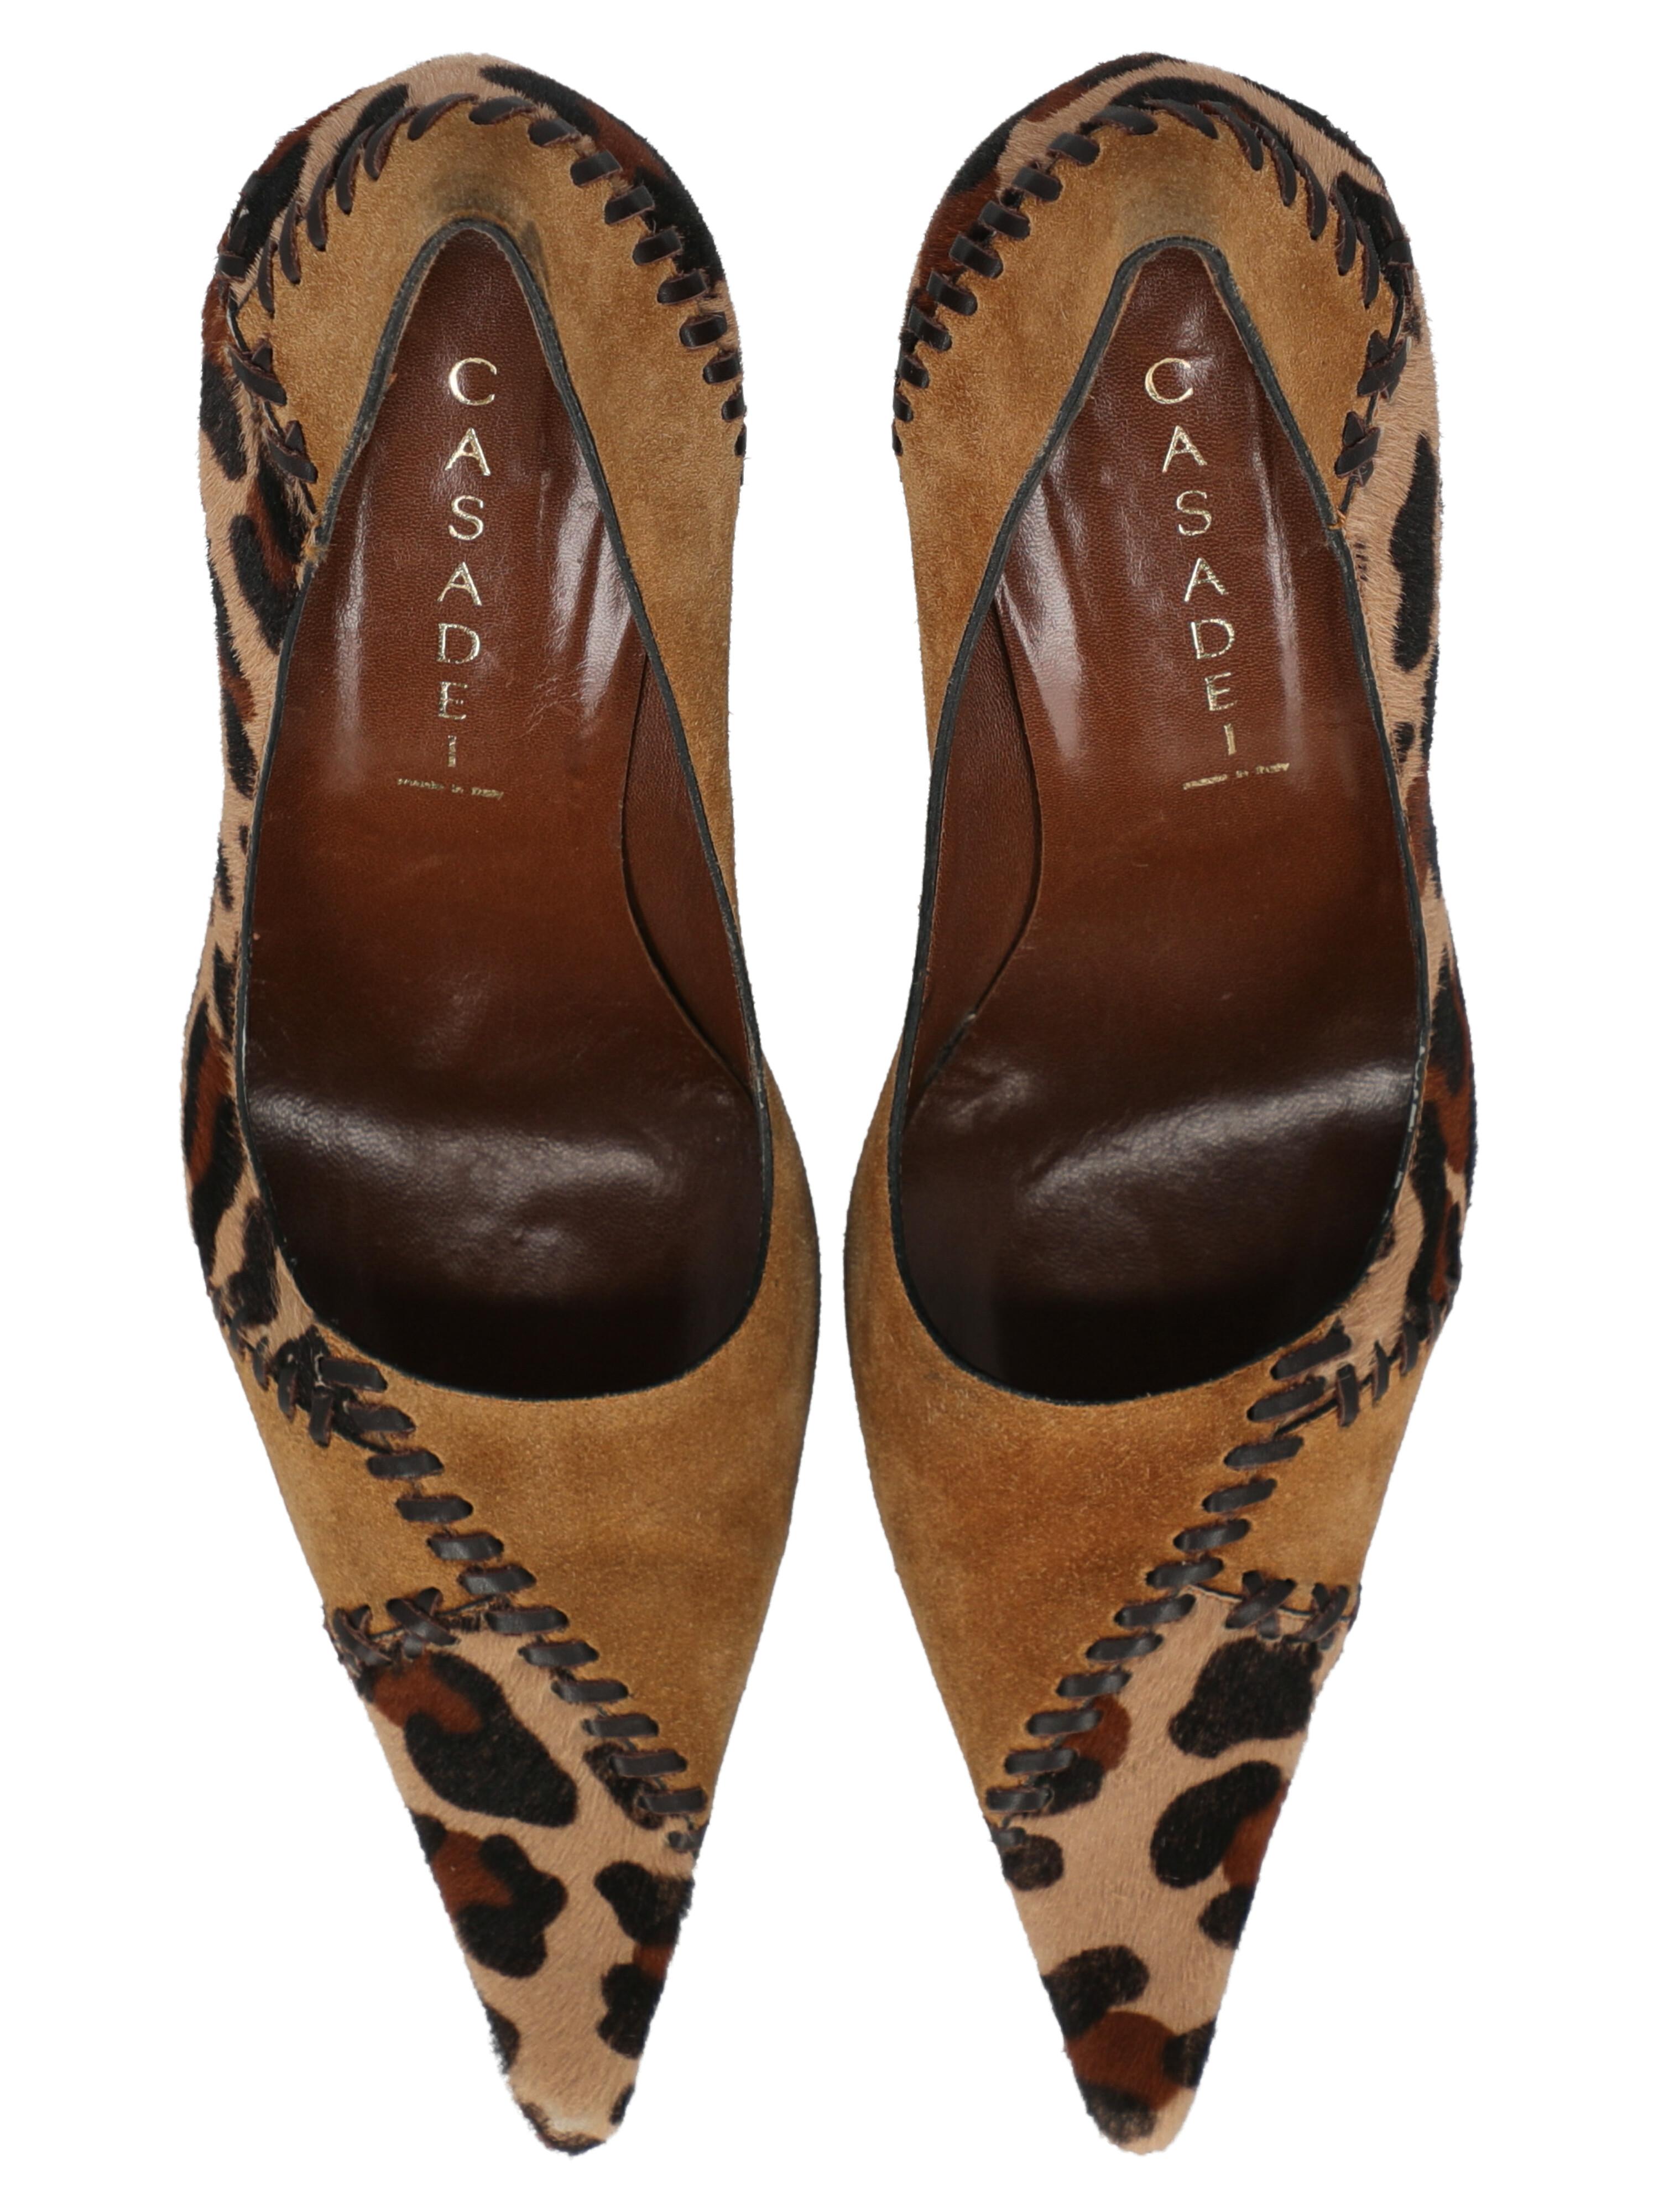 Casadei Women  Pumps Brown Leather US 9.5 For Sale 1